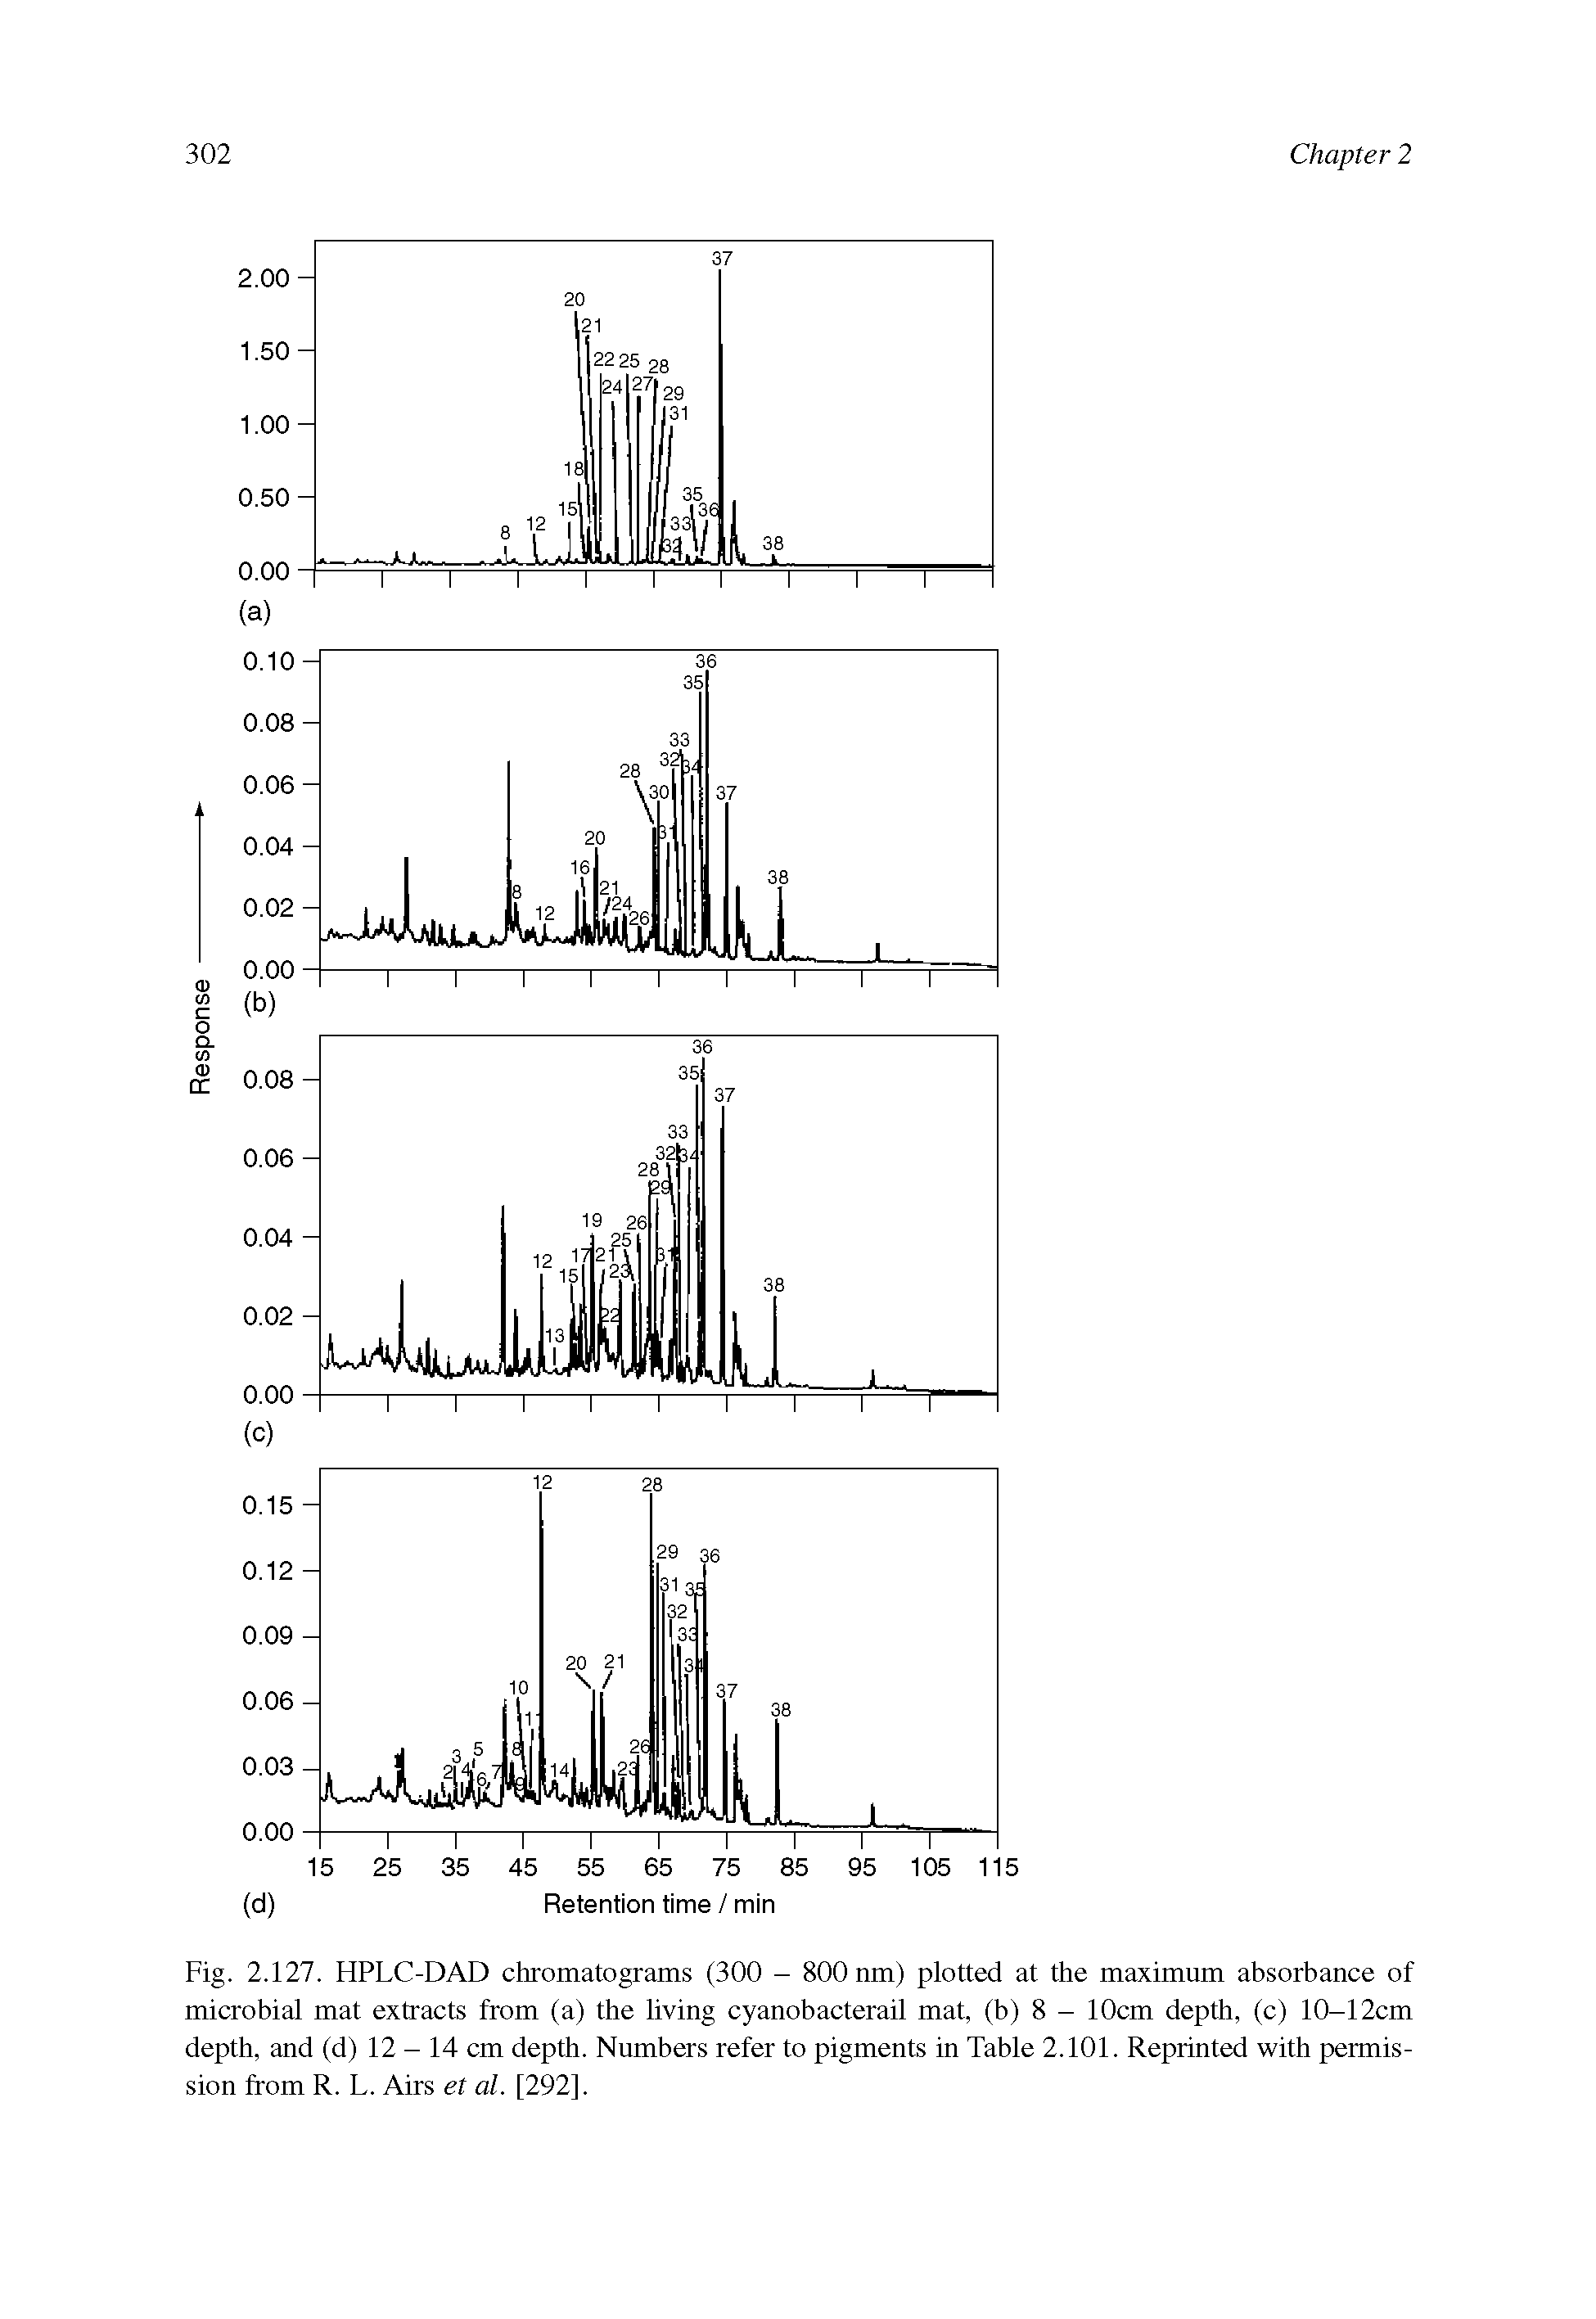 Fig. 2.127. HPLC-DAD chromatograms (300 - 800 nm) plotted at the maximum absorbance of microbial mat extracts from (a) the living cyanobacterail mat, (b) 8 - 10cm depth, (c) 10-12cm depth, and (d) 12 - 14 cm depth. Numbers refer to pigments in Table 2.101. Reprinted with permission from R. L. Airs et al. [292].